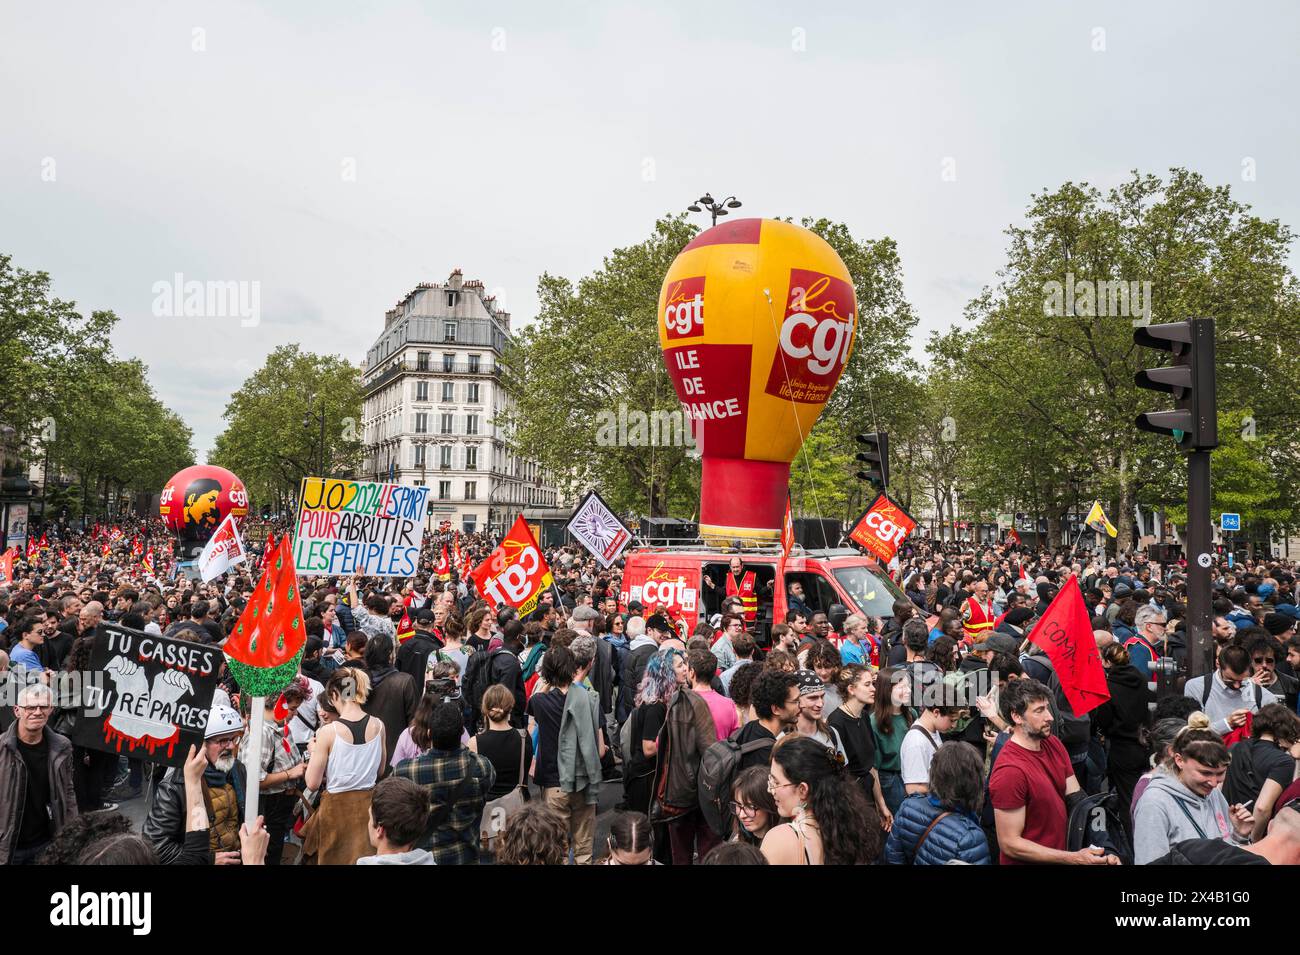 Arrival at Bastille. The balloon CGT Ile de France, the placard of the artist Jean-Batiste Redde, J.O. 2024 le sport pour abrutir les peuples, in the crowd. May 1, 2024 demonstration in Paris against austerity, for jobs and wages. France, Patis on May 1, 2024. Photograph by Patricia Huchot-Boissier / Collectif DyF. Stock Photo